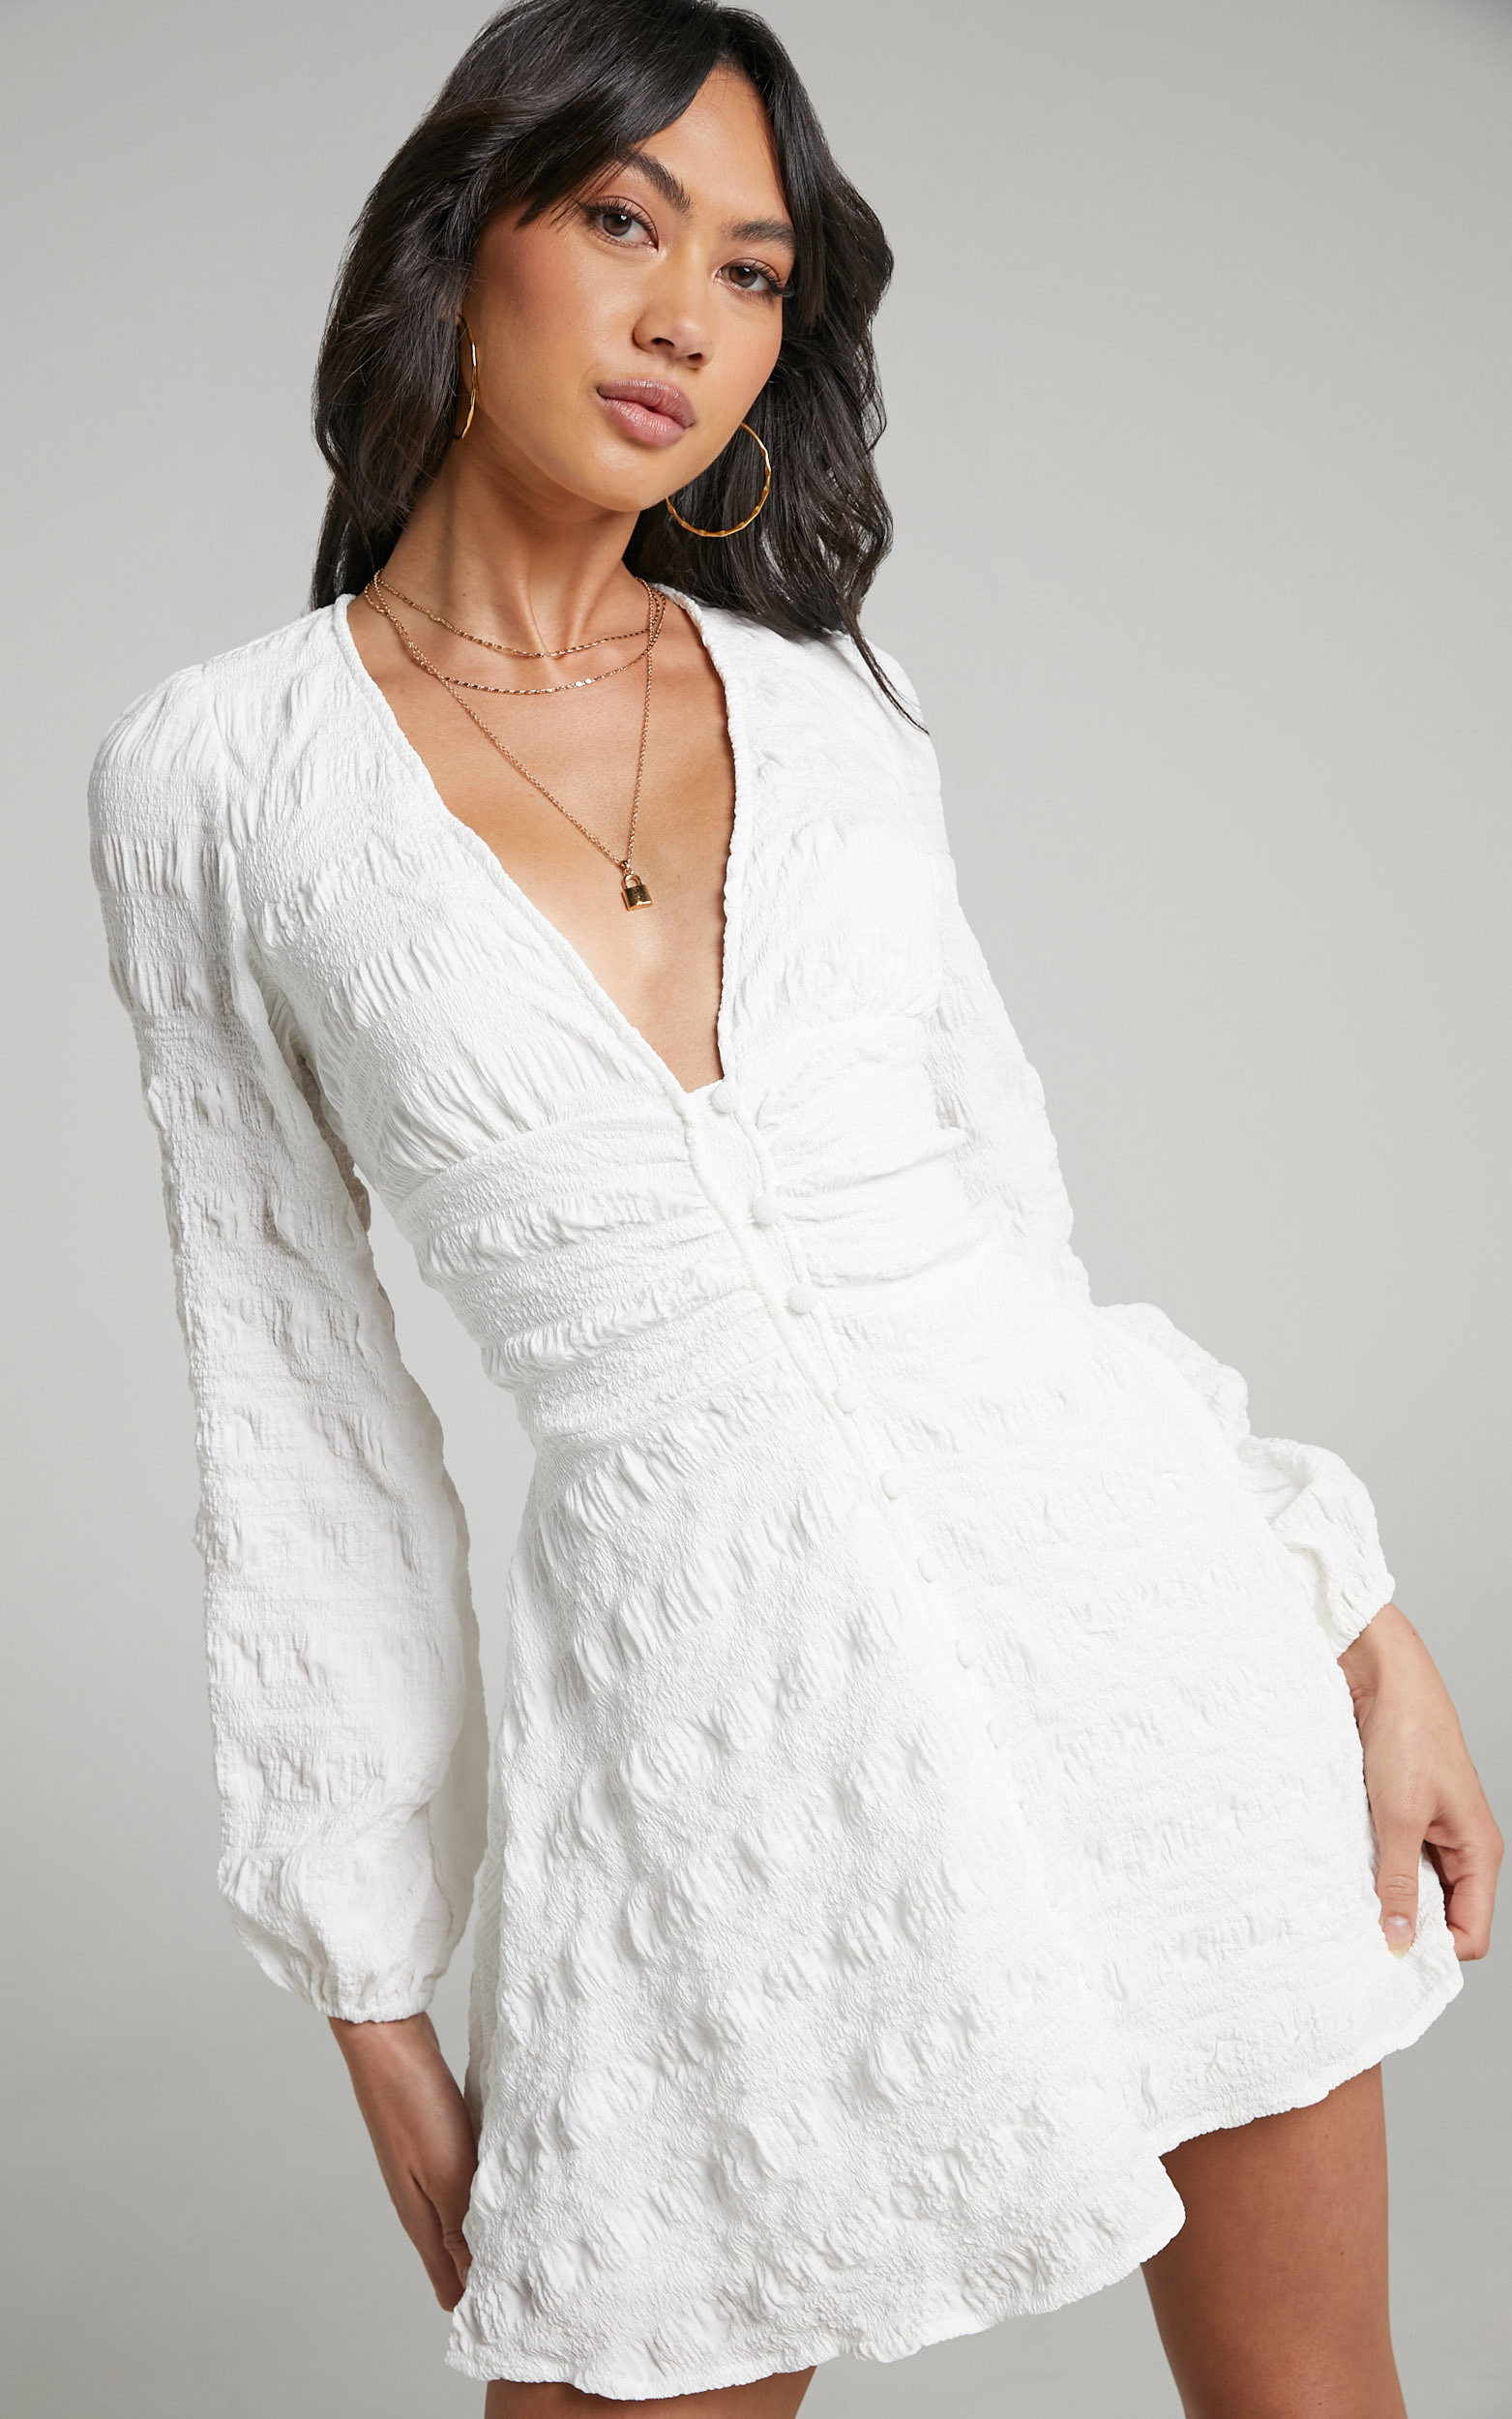 Sanaa Long Sleeve Open Back Mini Dress in White - 04, WHT1, hi-res image number null